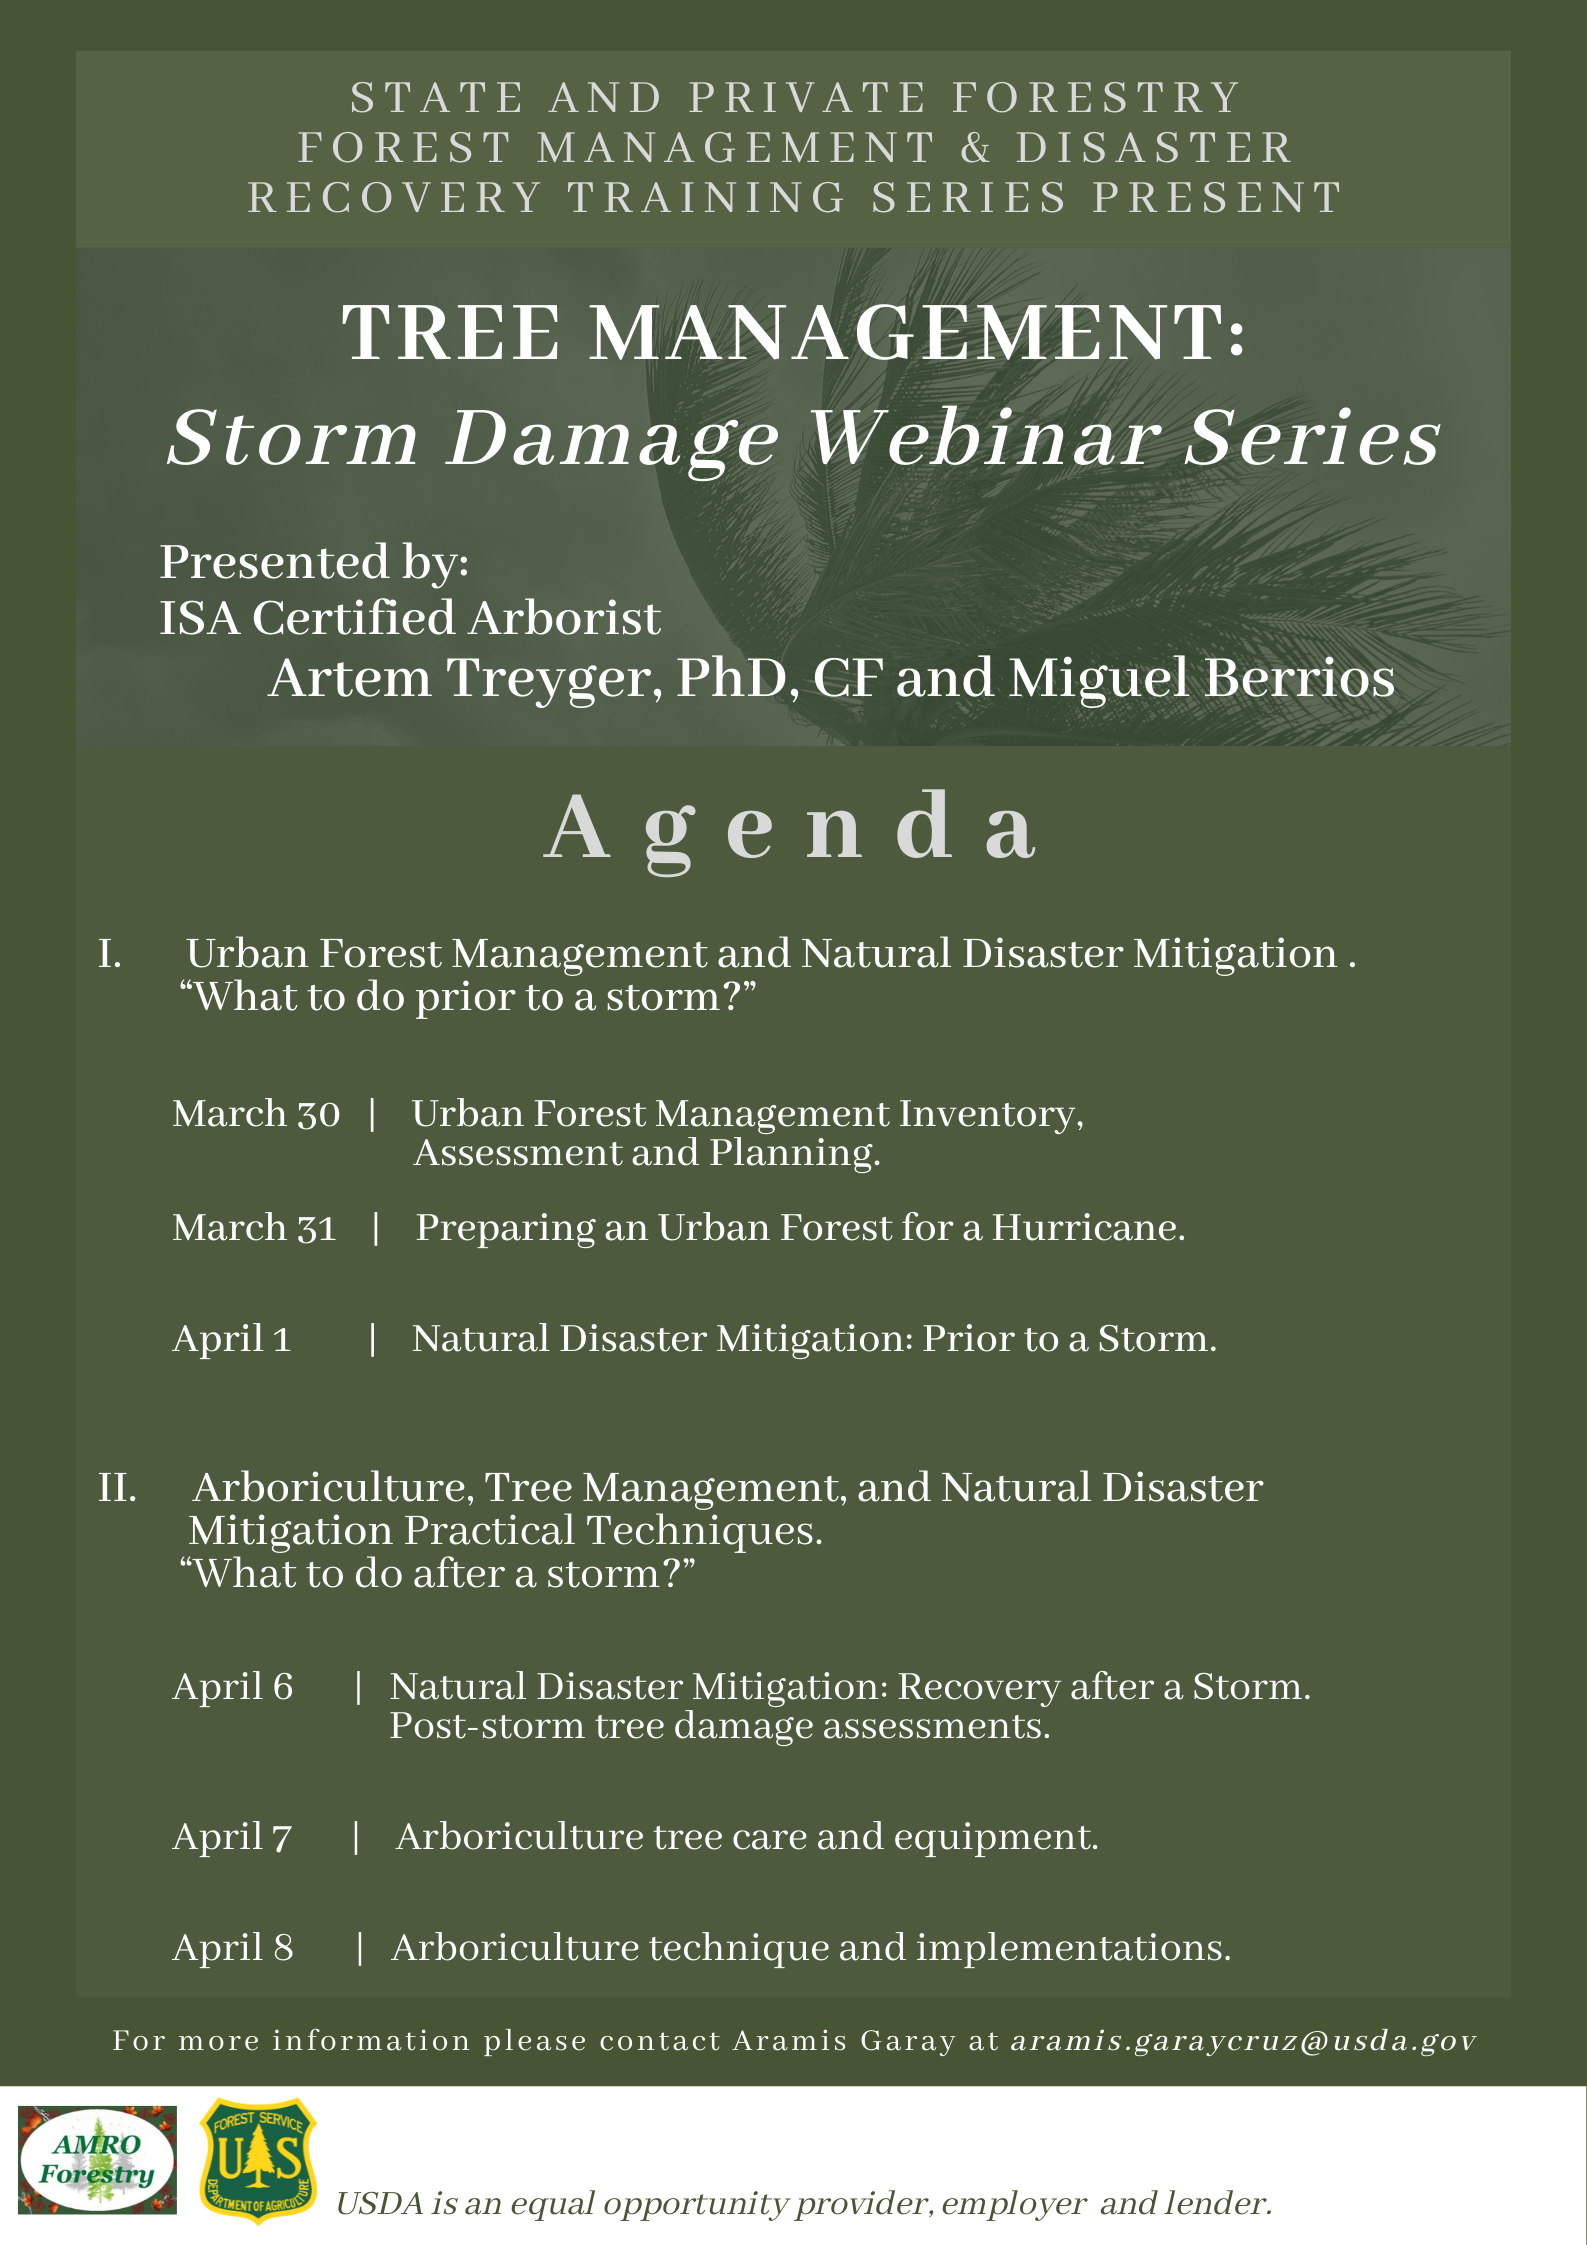 Information about the Storm Damage Webinar Series